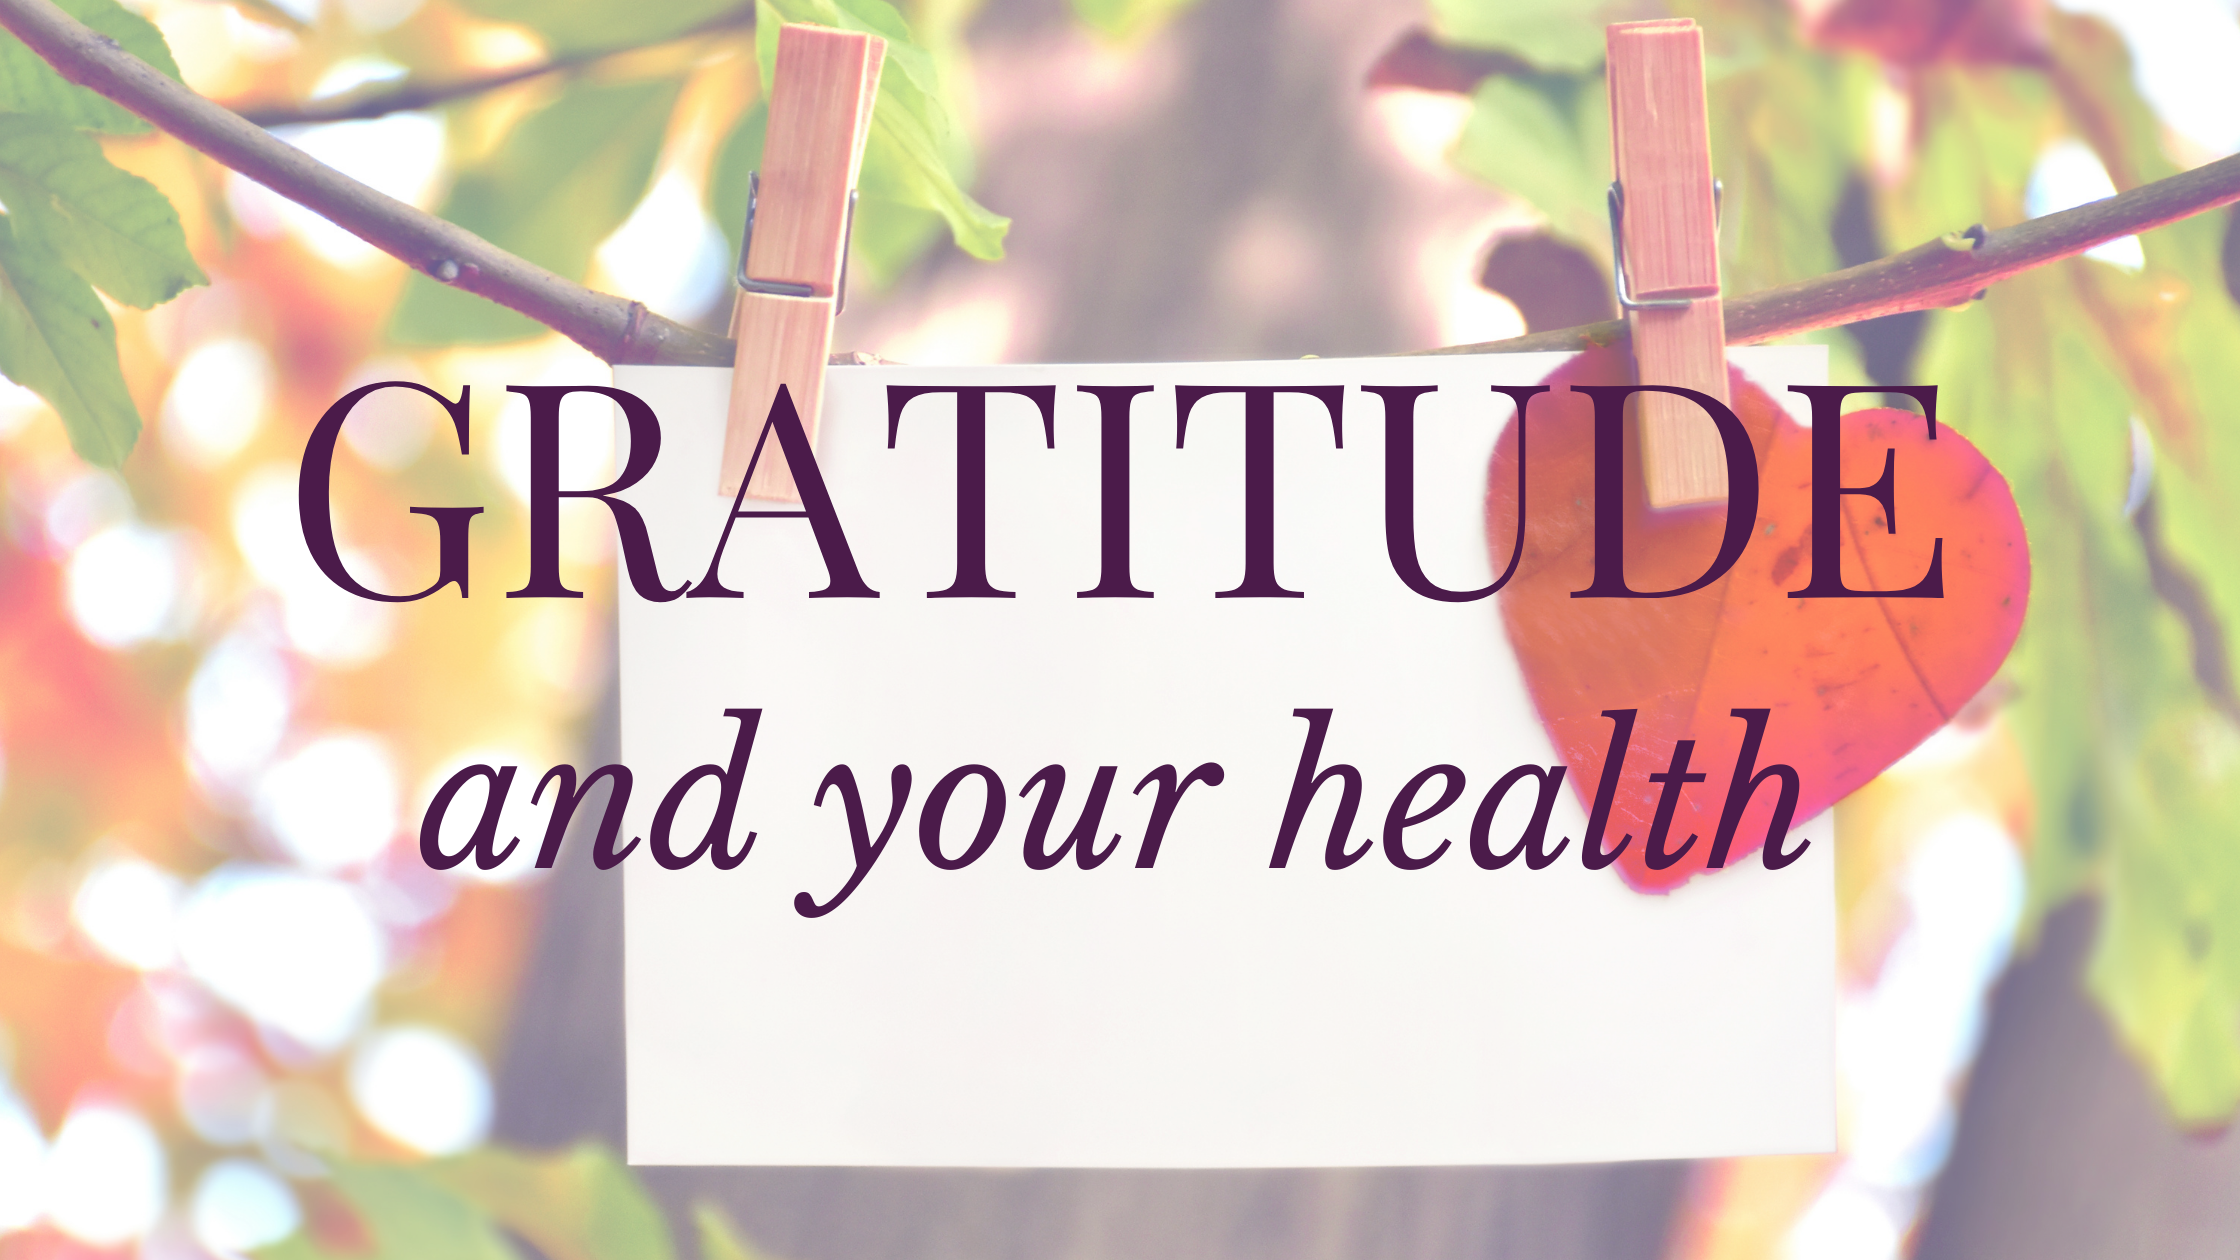 Gratitude and your health